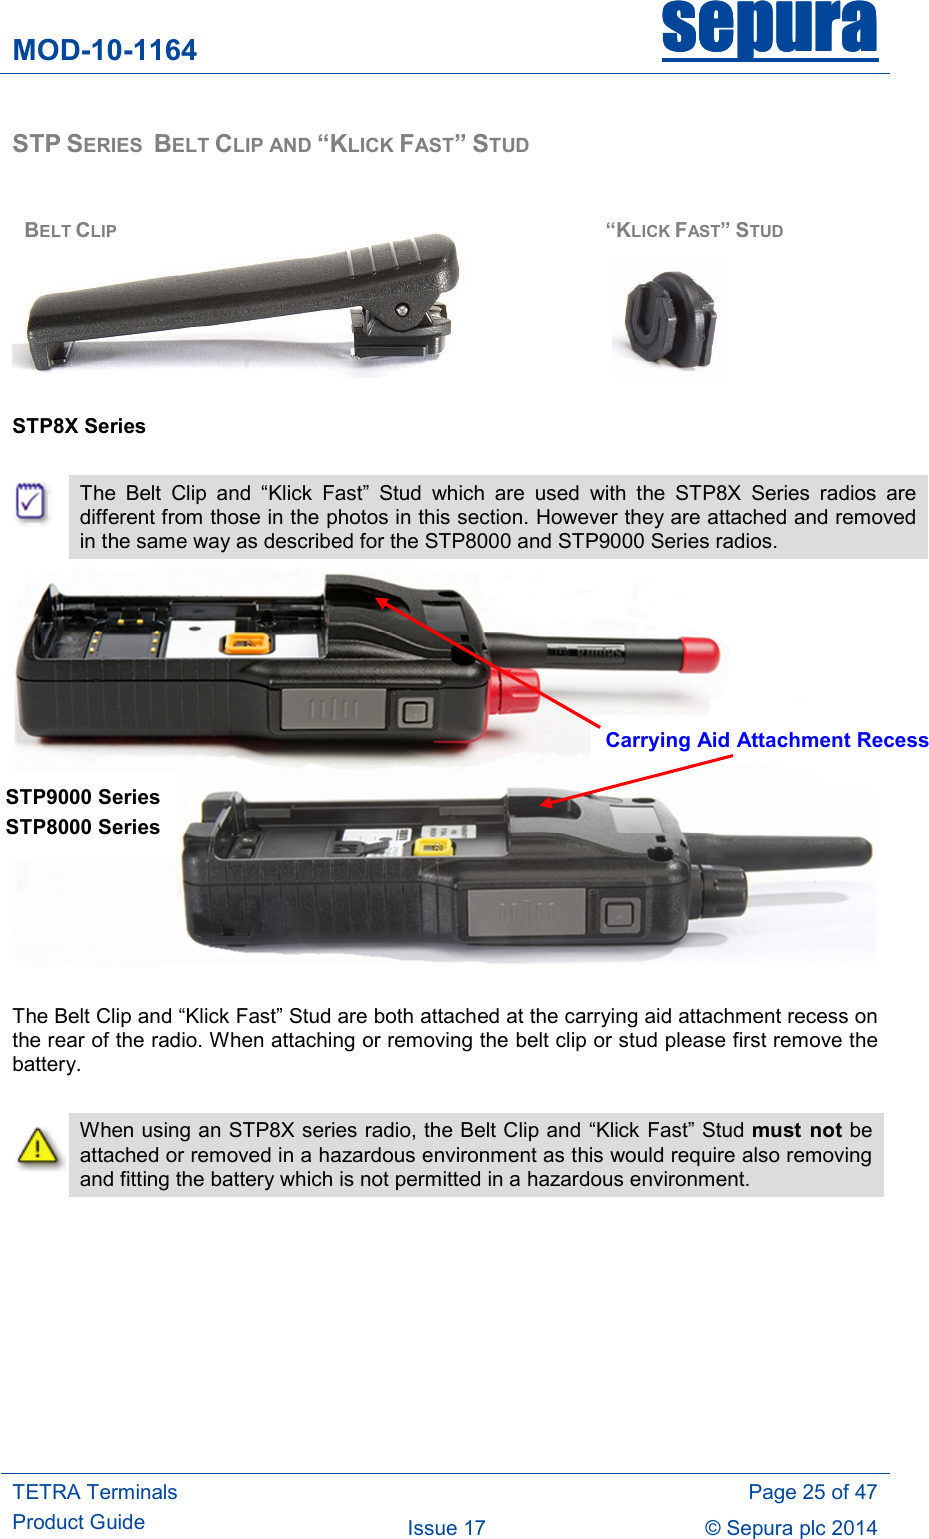 MOD-10-1164 sepurasepurasepurasepura     TETRA Terminals Product Guide   Page 25 of 47 Issue 17  © Sepura plc 2014   STP SERIES  BELT CLIP AND “KLICK FAST” STUD         STP8X Series   The  Belt  Clip  and  “Klick  Fast”  Stud  which  are  used  with  the  STP8X  Series  radios  are different from those in the photos in this section. However they are attached and removed in the same way as described for the STP8000 and STP9000 Series radios.   The Belt Clip and “Klick Fast” Stud are both attached at the carrying aid attachment recess on the rear of the radio. When attaching or removing the belt clip or stud please first remove the battery.   When using an STP8X series radio, the Belt Clip and “Klick Fast” Stud must  not be attached or removed in a hazardous environment as this would require also removing and fitting the battery which is not permitted in a hazardous environment.   BELT CLIP “KLICK FAST” STUD Carrying Aid Attachment Recess STP9000 Series  STP8000 Series  